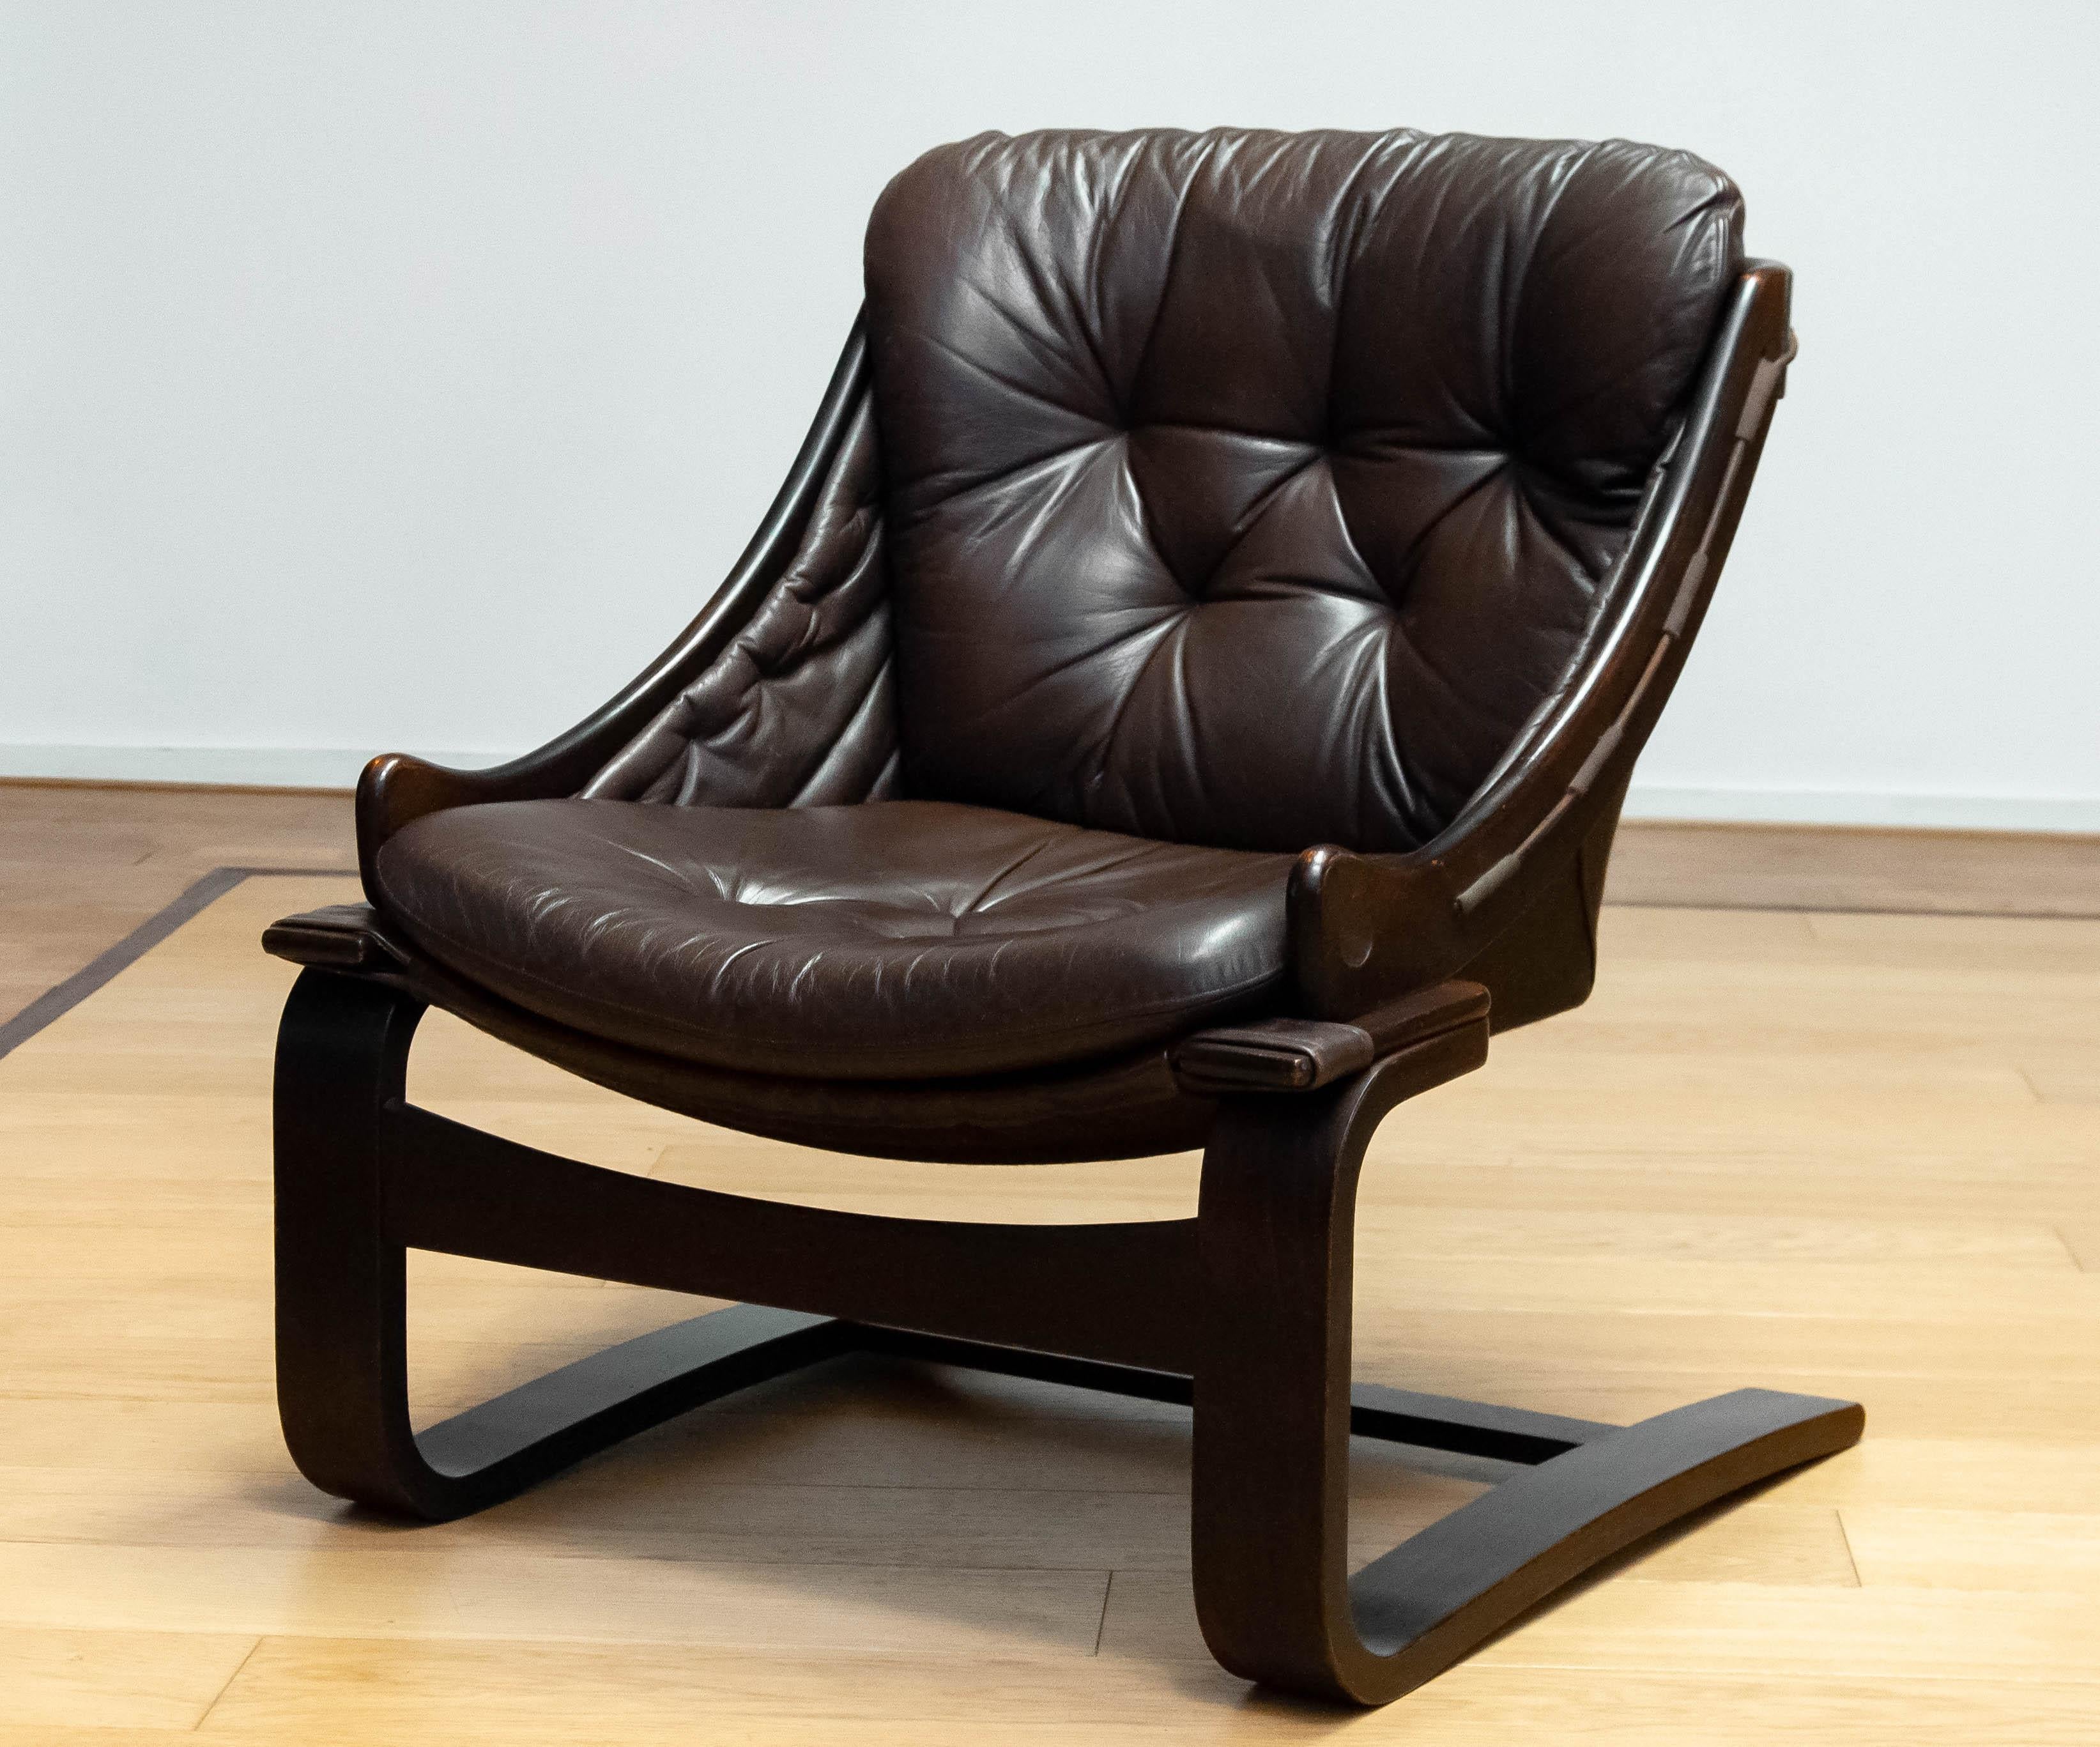 1970s Brown Leather Lounge Chair Model 'Krona' By Ake Fribytter For Nelo, Sweden In Good Condition For Sale In Silvolde, Gelderland